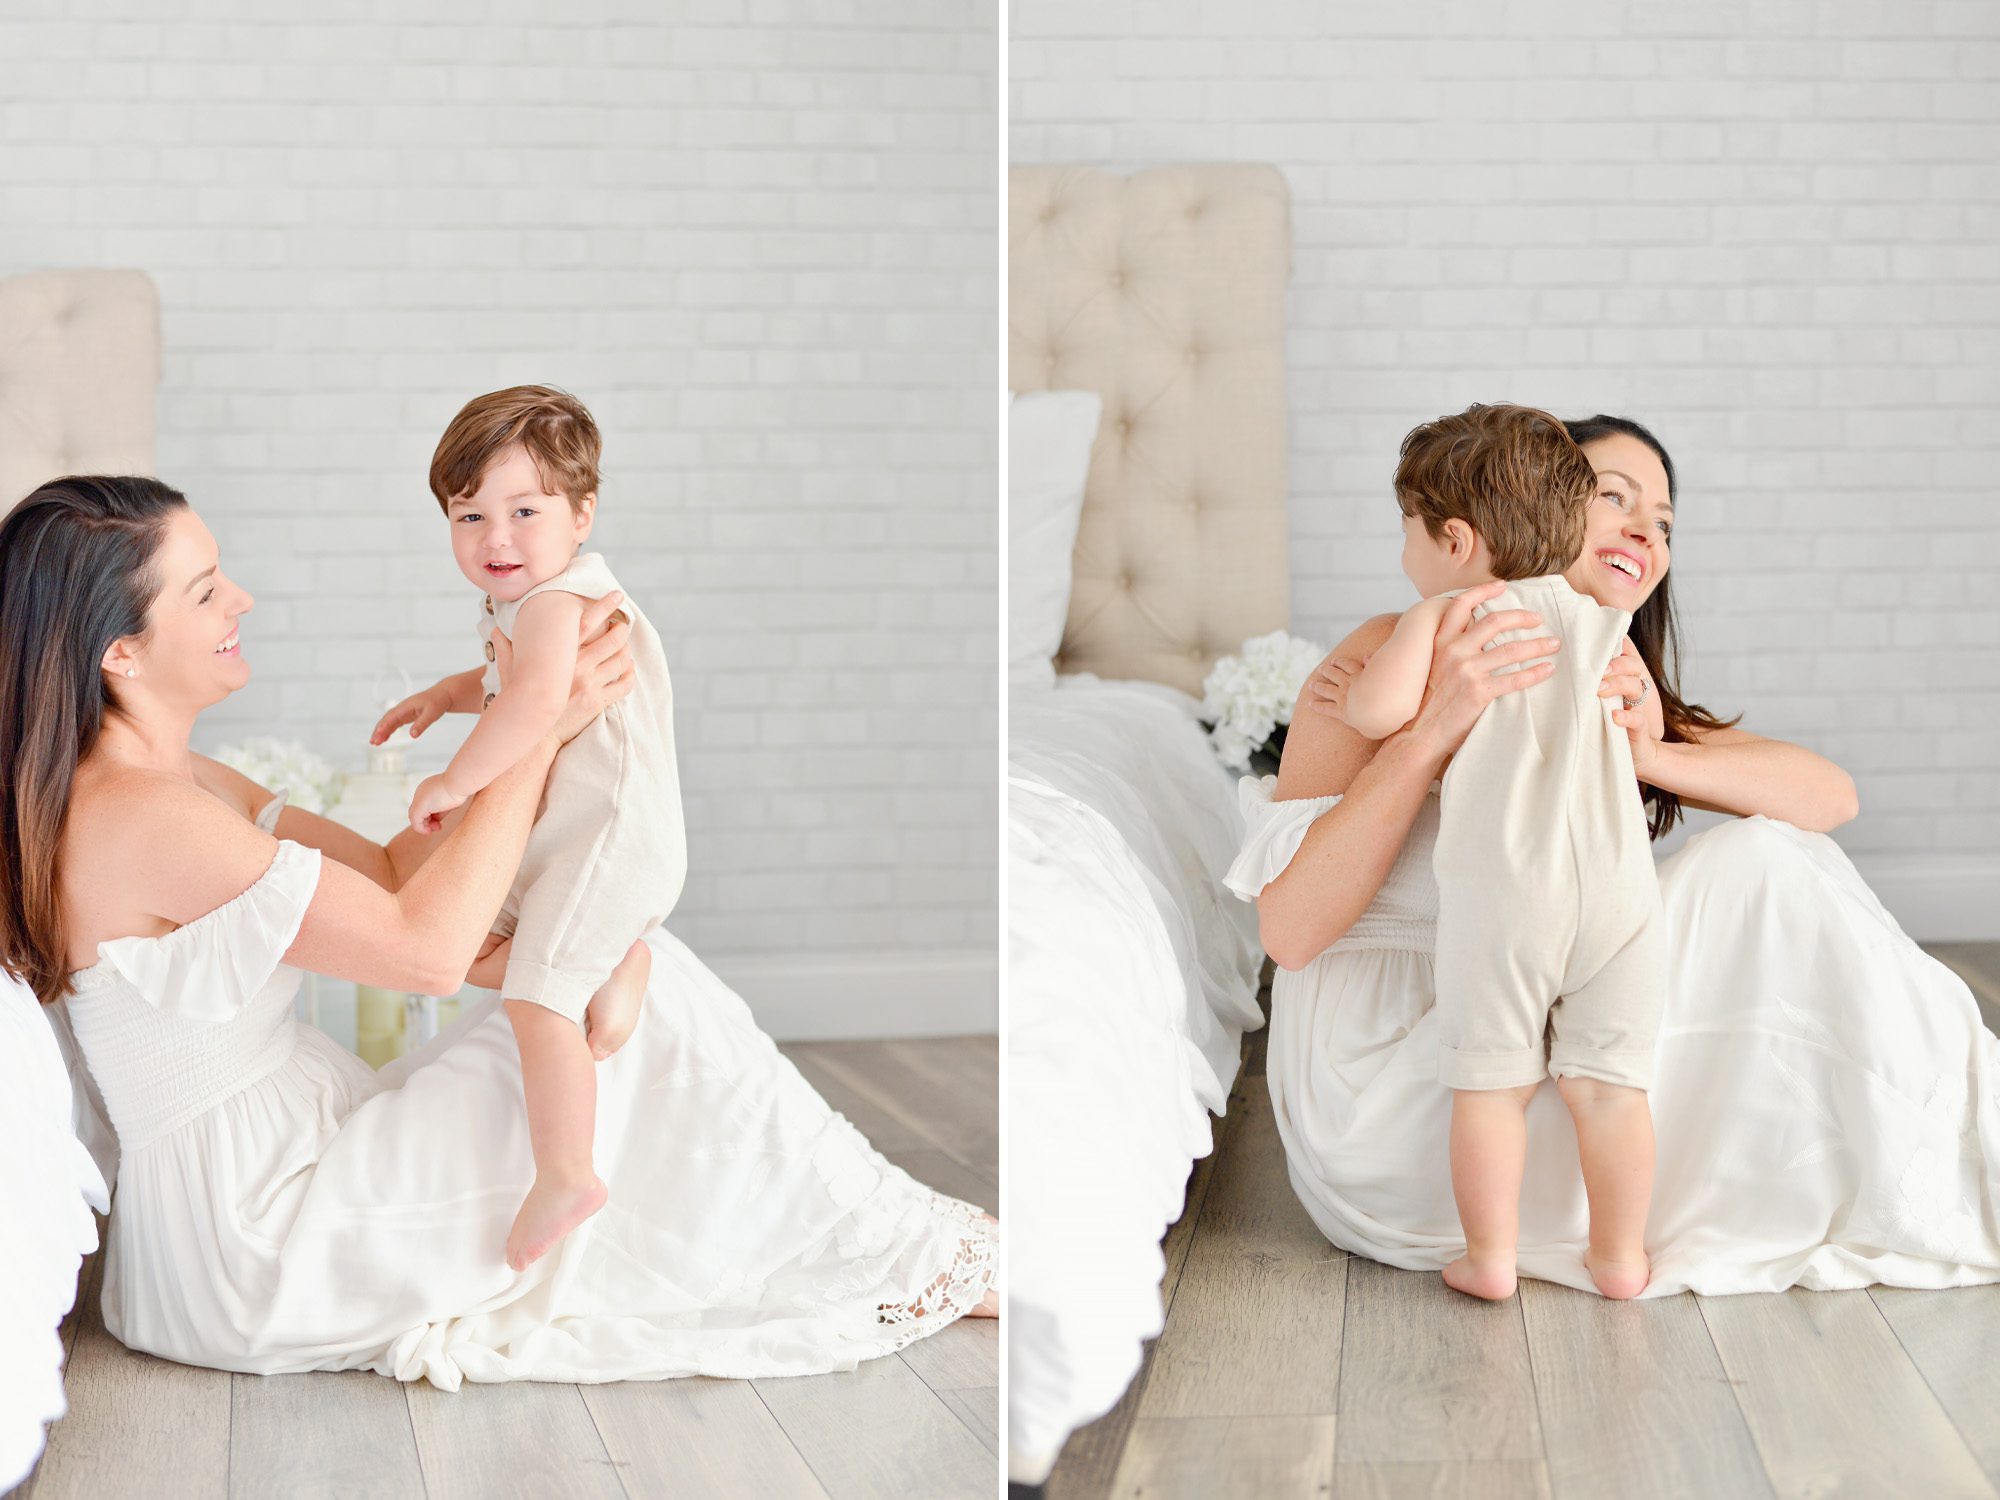 A brunette mother and baby boy portrait session in a bright white studio having fun together.